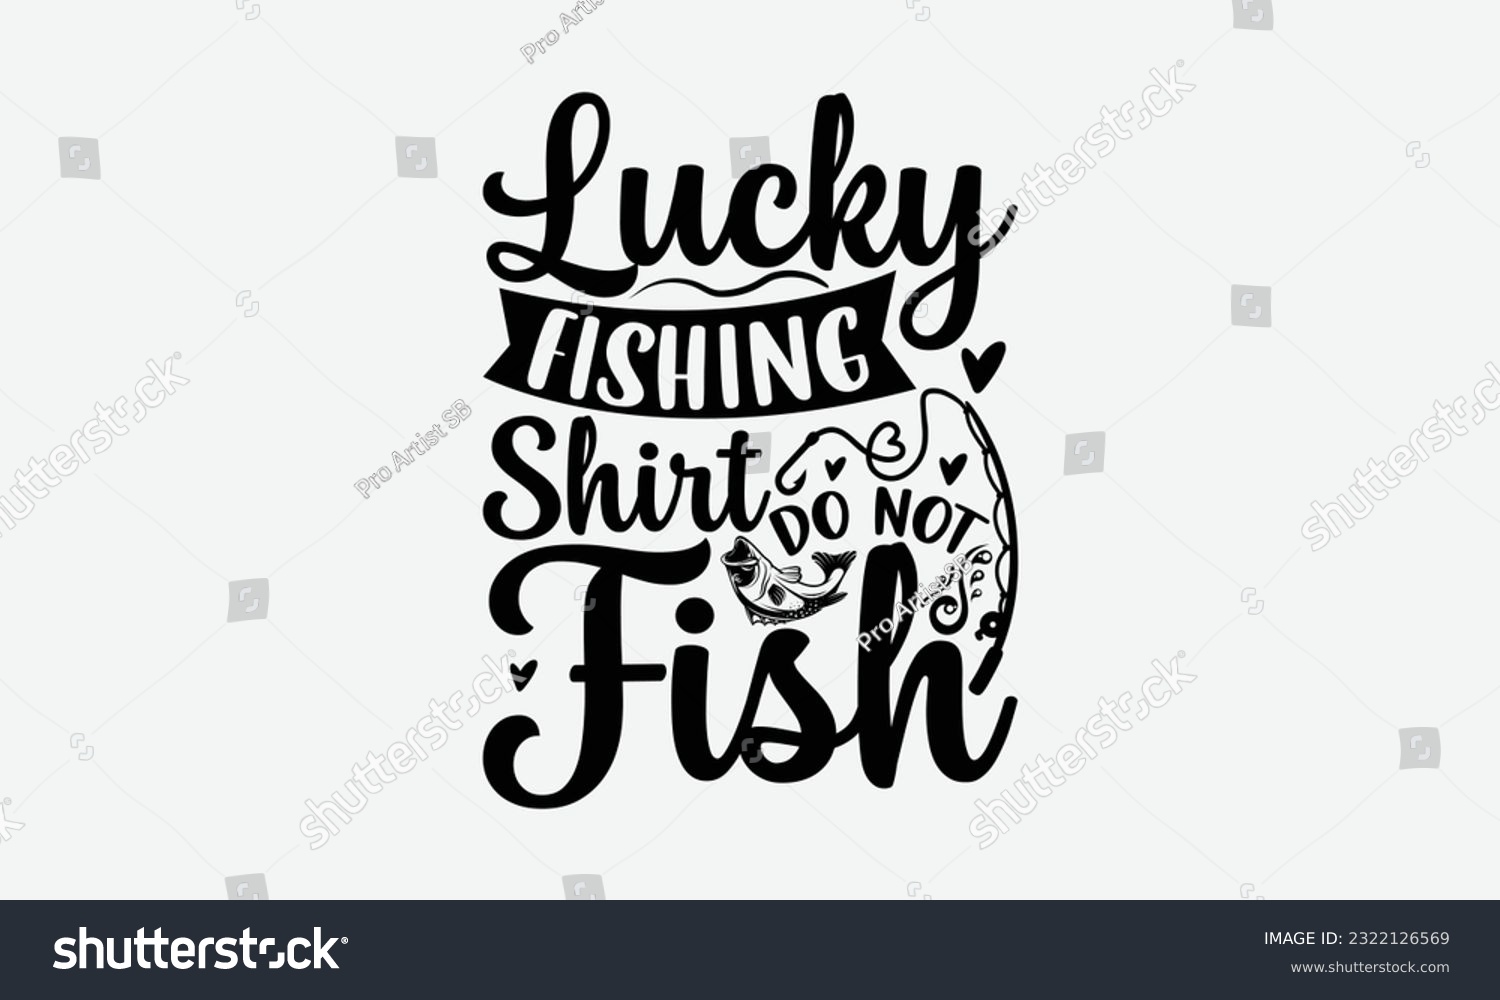 SVG of Lucky Fishing Shirt Do Not Fish - Fishing SVG Design, Fisherman Quotes, Handmade Calligraphy Vector Illustration, Isolated On White Background. svg